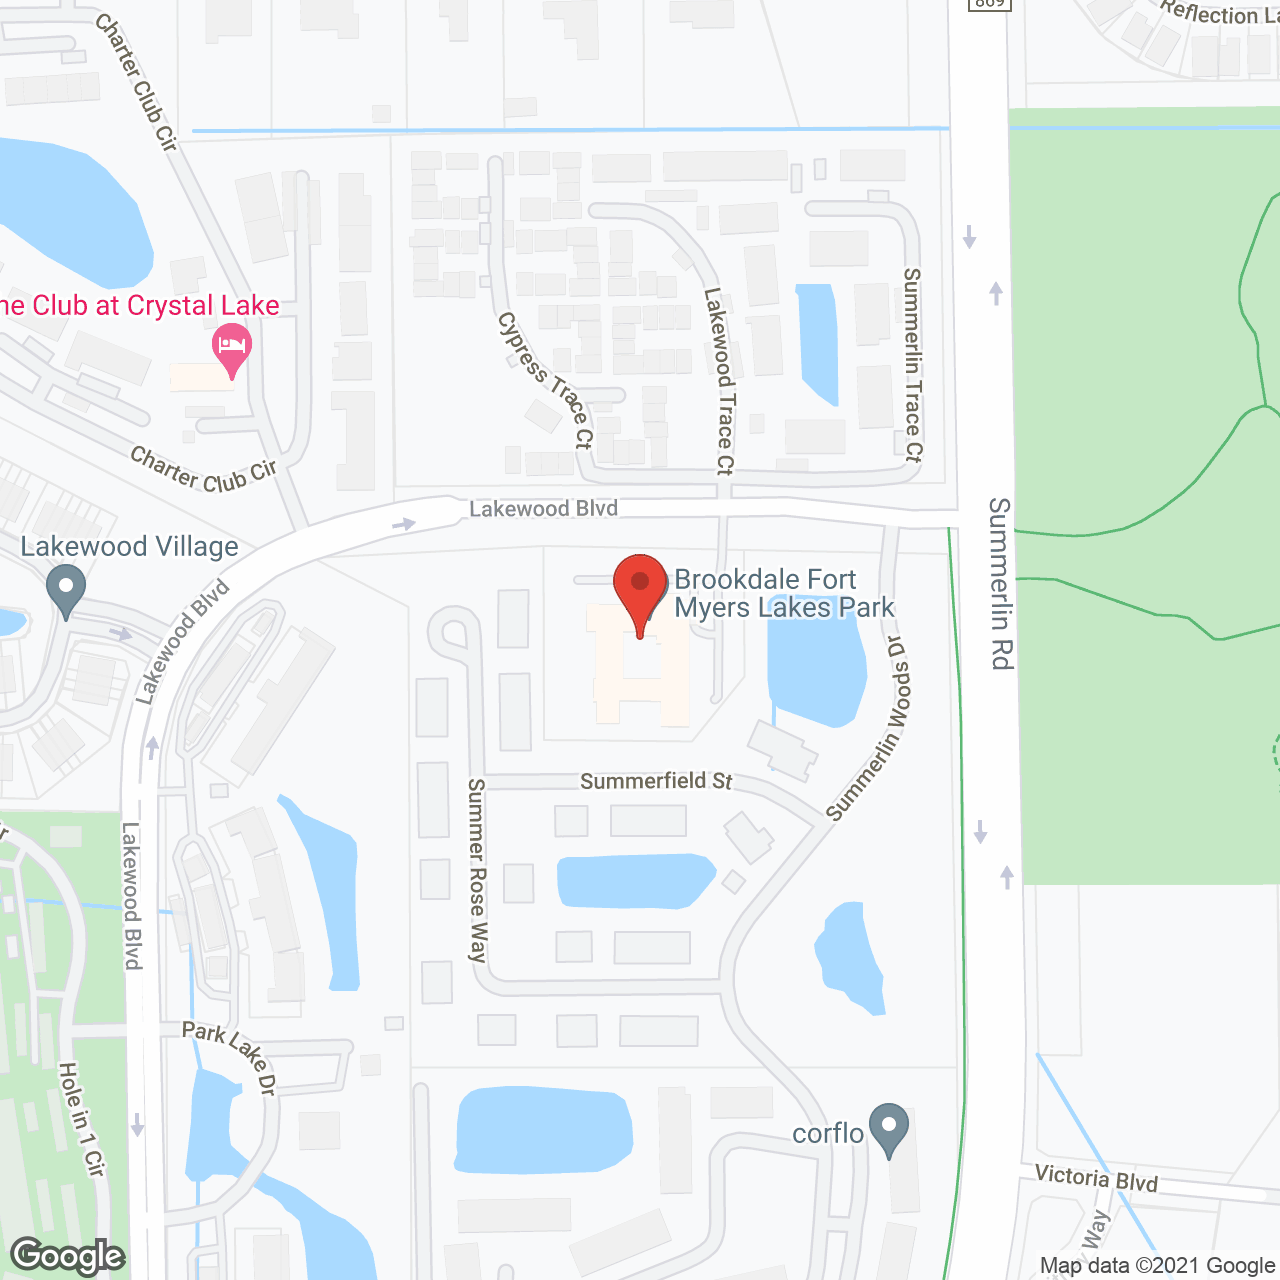 Brookdale Fort Myers Lakes Park in google map